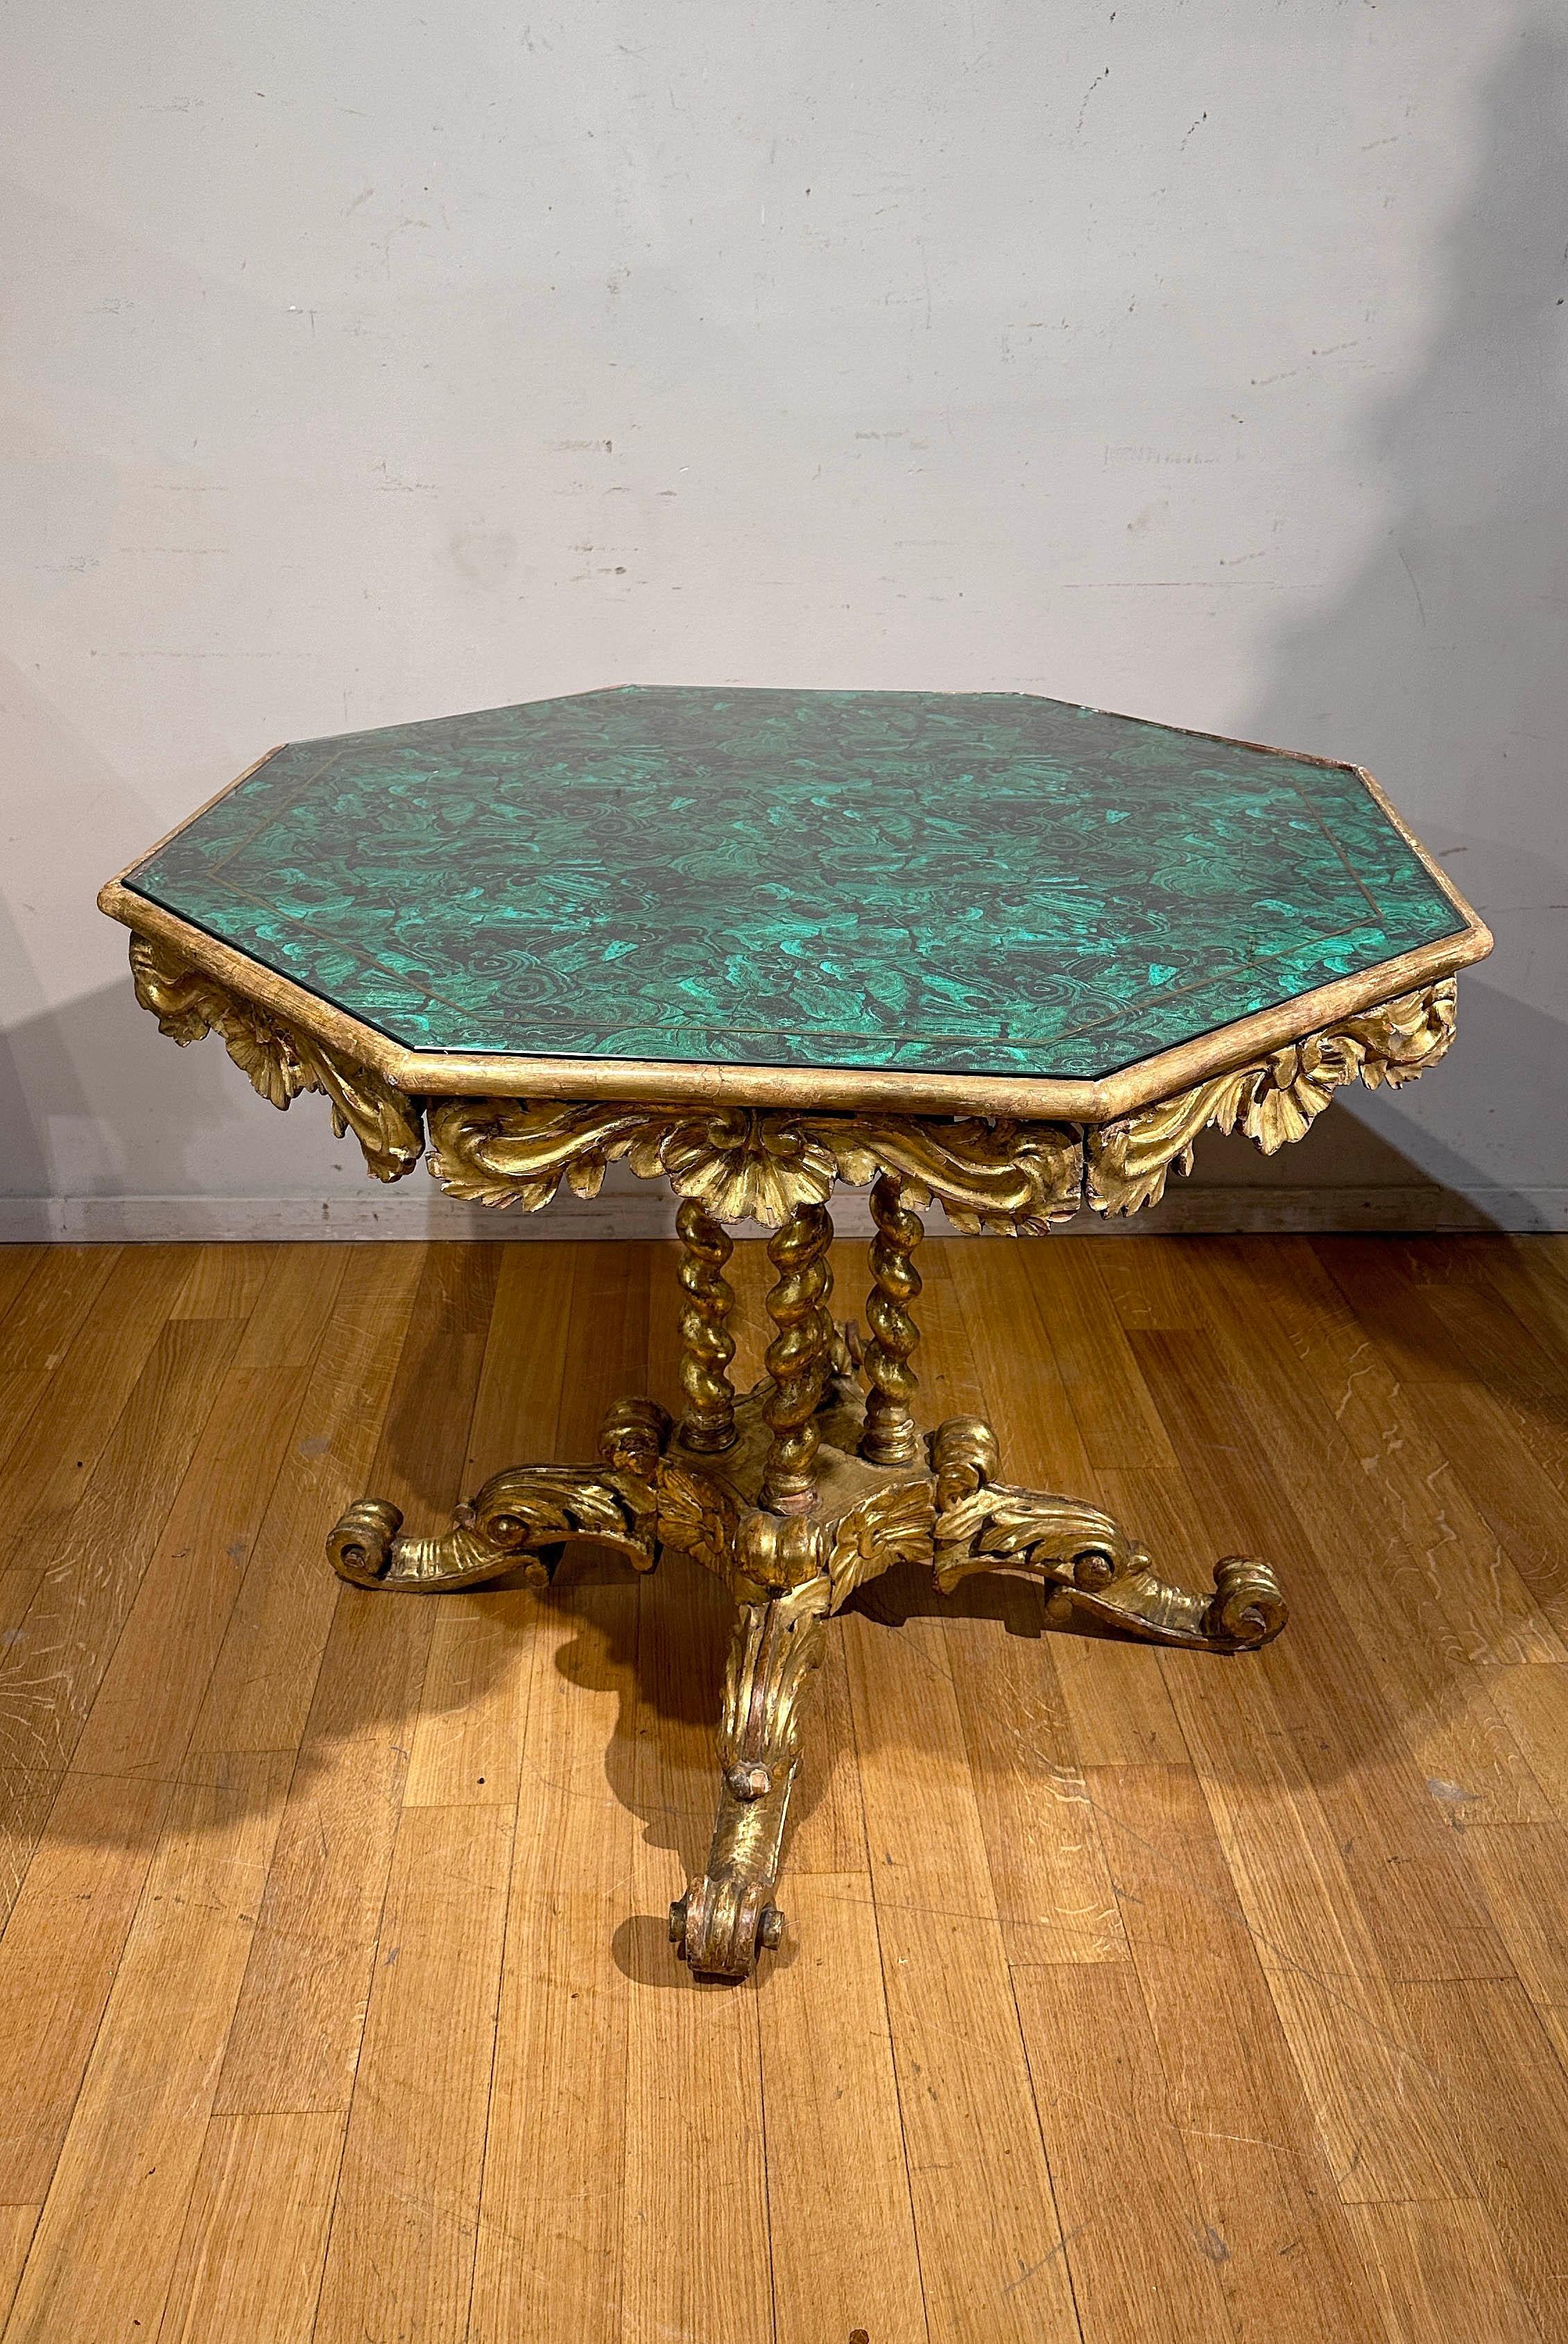 Carved EARLY 19th CENTURY GILDED WOOD TABLE WITH SIMILAR MALACHITE FABRIC For Sale